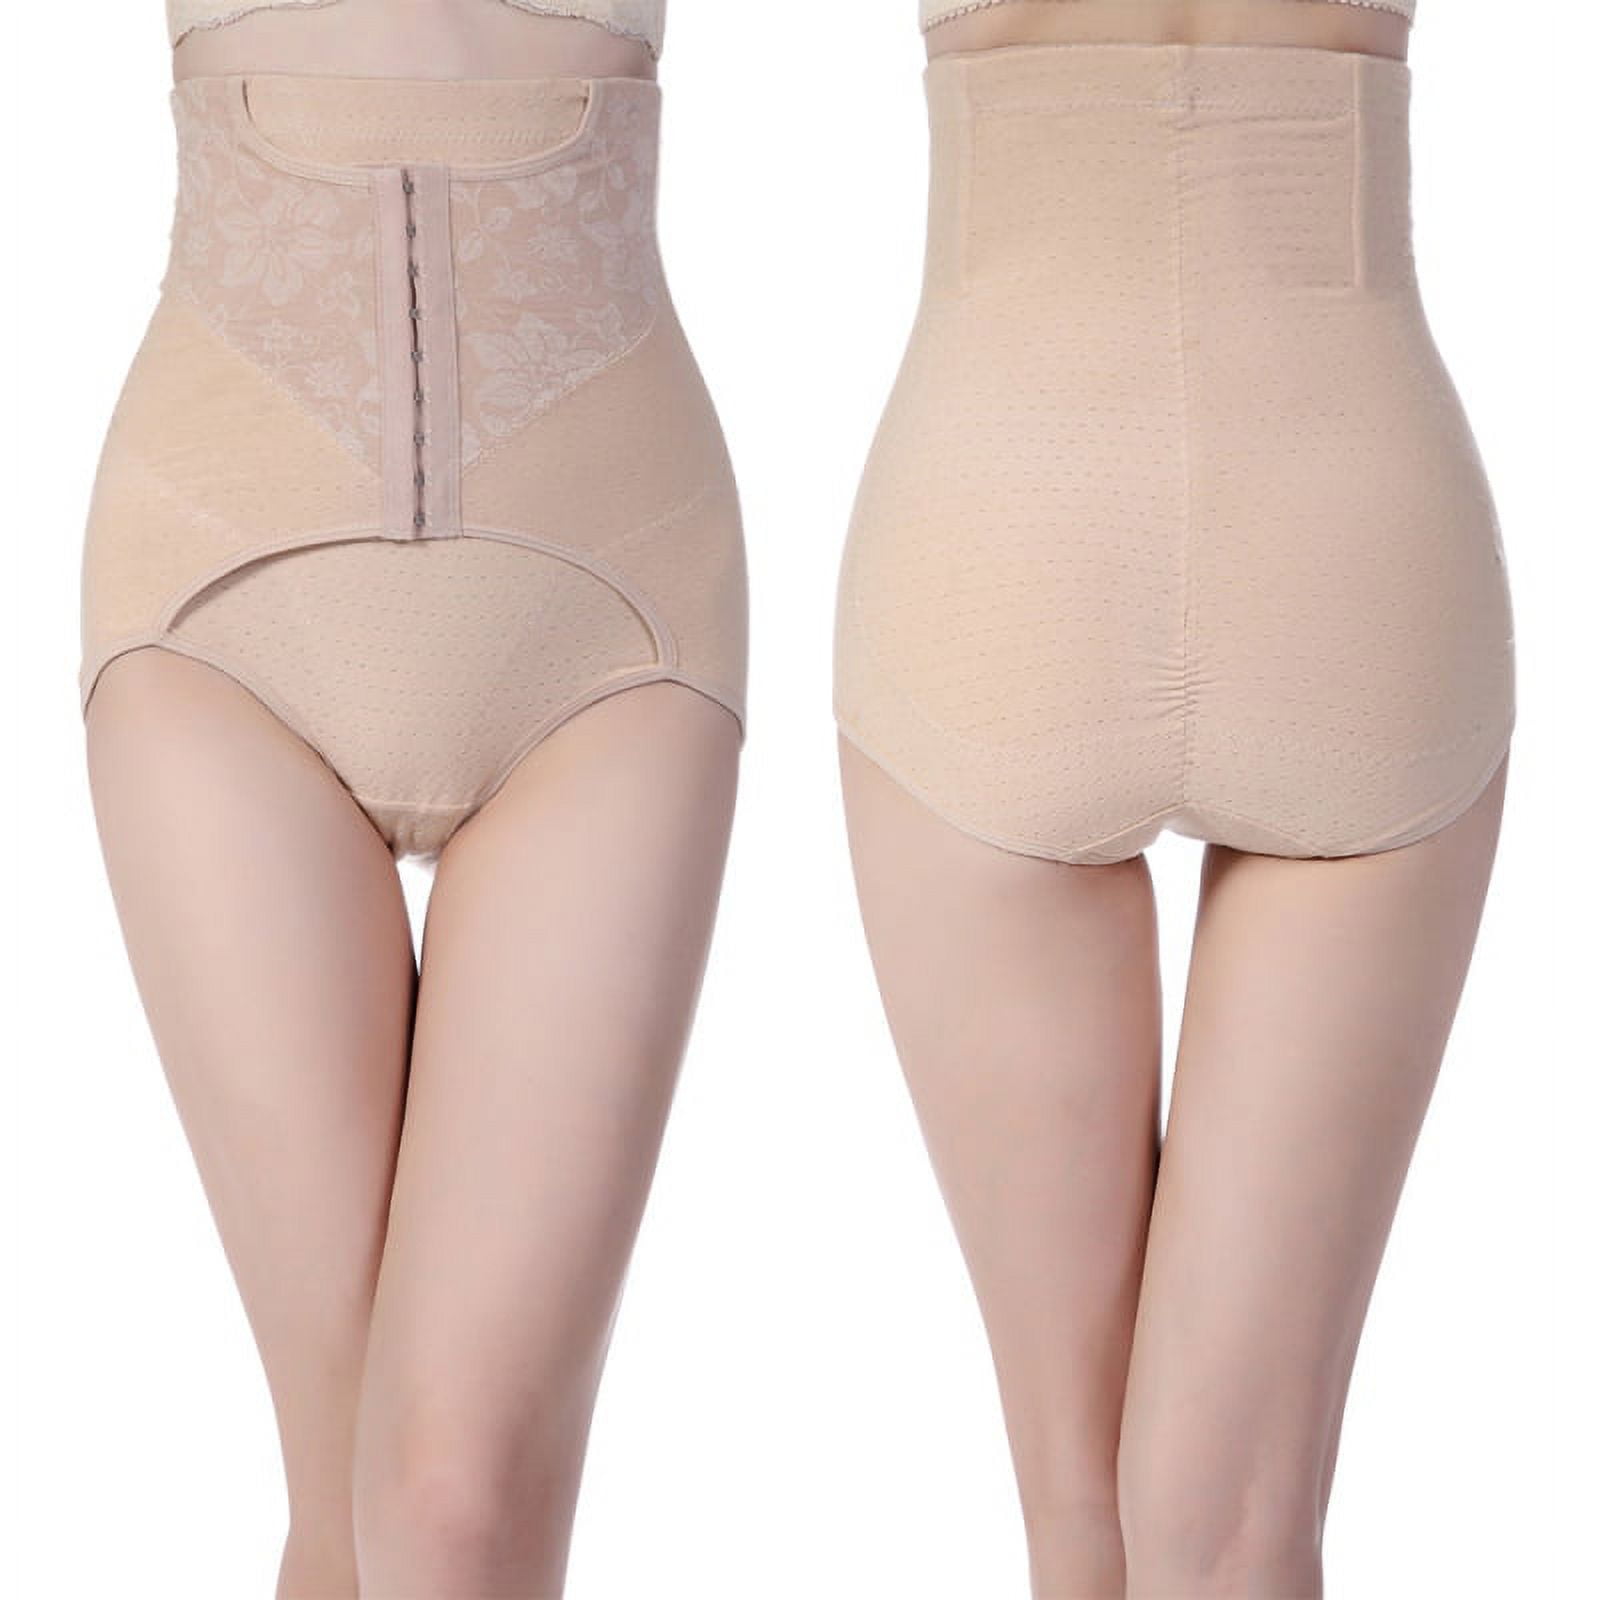 1 PC ] Authentic Japan Honeycomb Slimming Panty, Butt Enhancing Panty,  Girdle, Gurdle, High Waist Slimming Plus Size, Waist Shaper, Belly Control,  Underwear for Women ONE SIZE FITS ALL